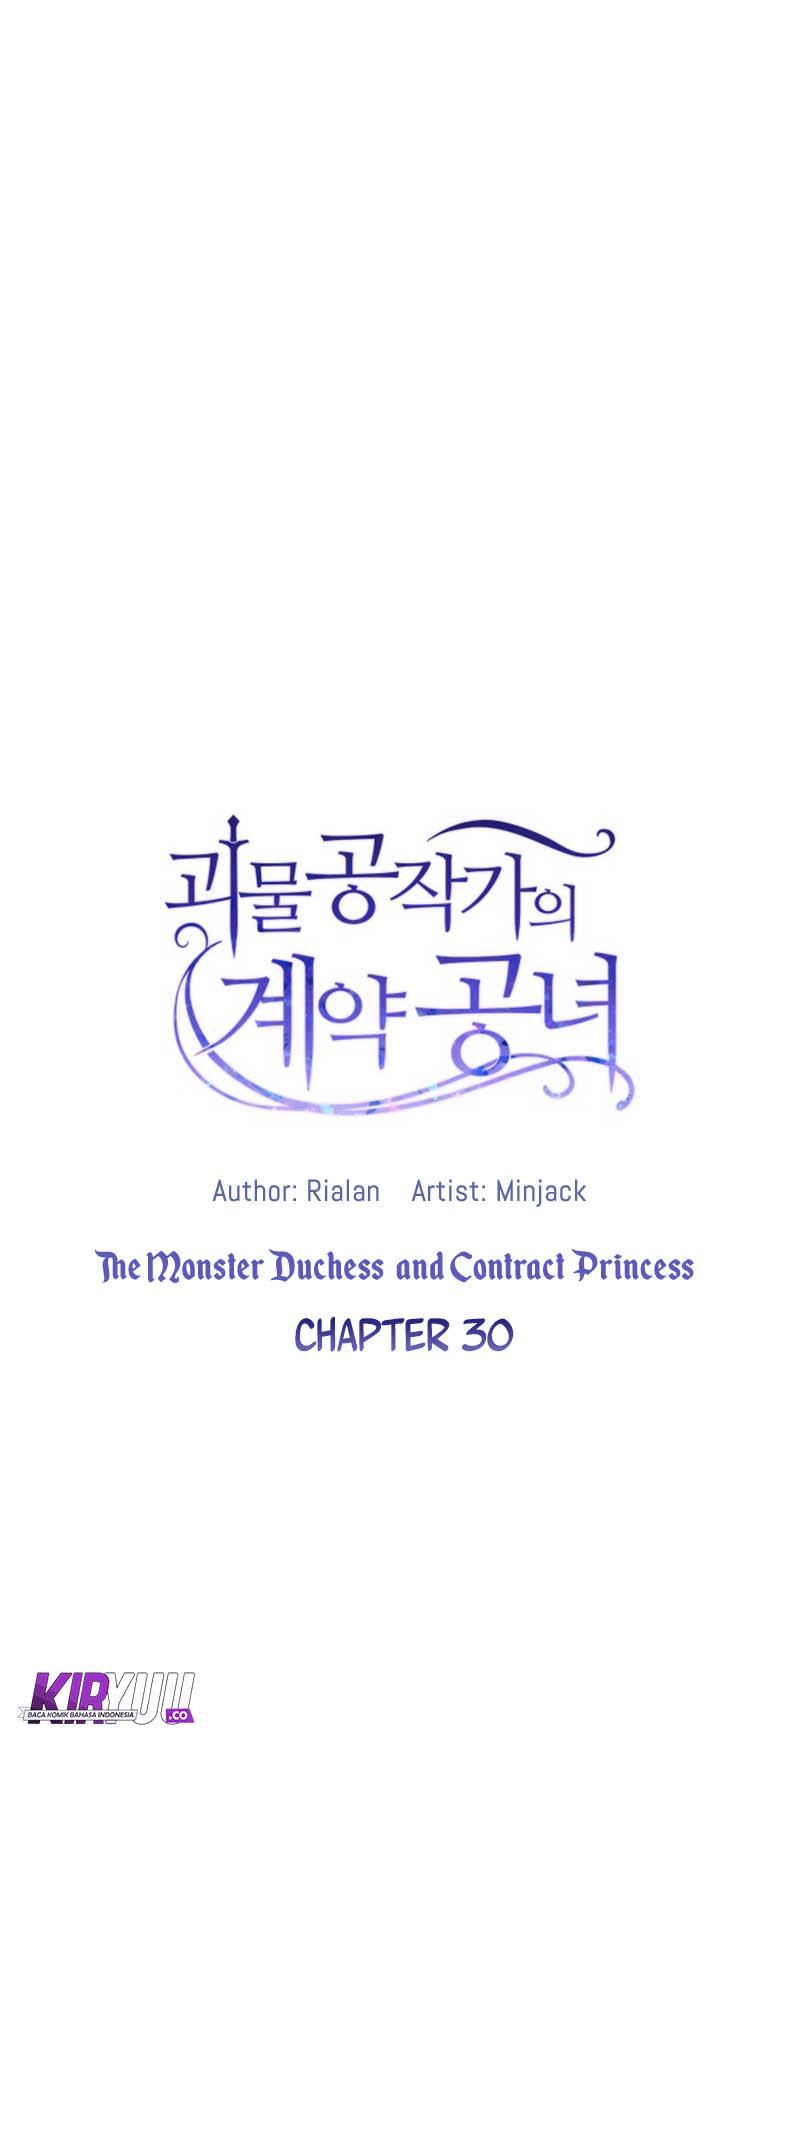 The Monster Duchess and Contract Princess Chapter 30